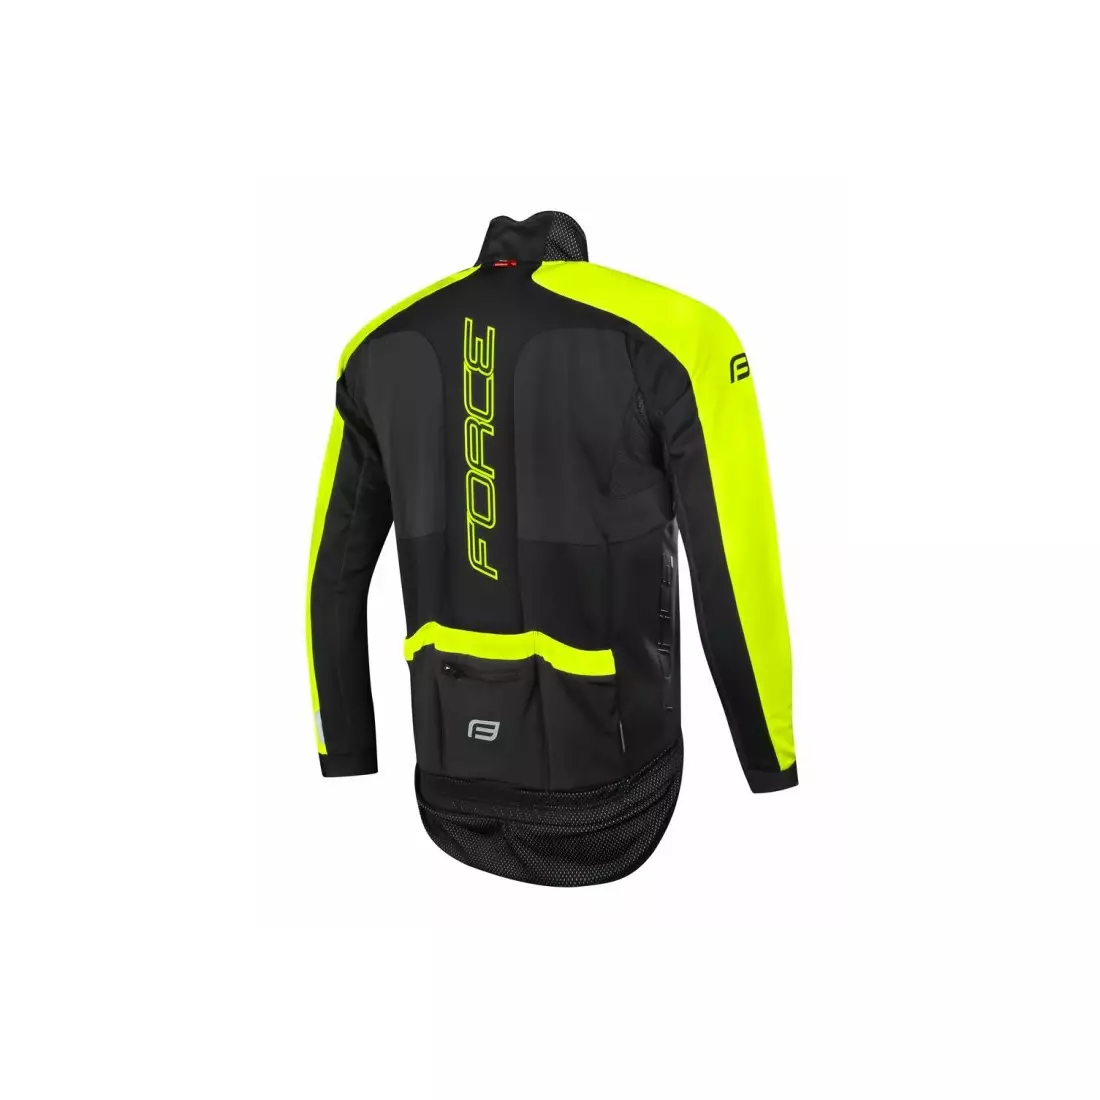 FORCE X100 winter bicycle jacket Black Fluor Yellow 899860